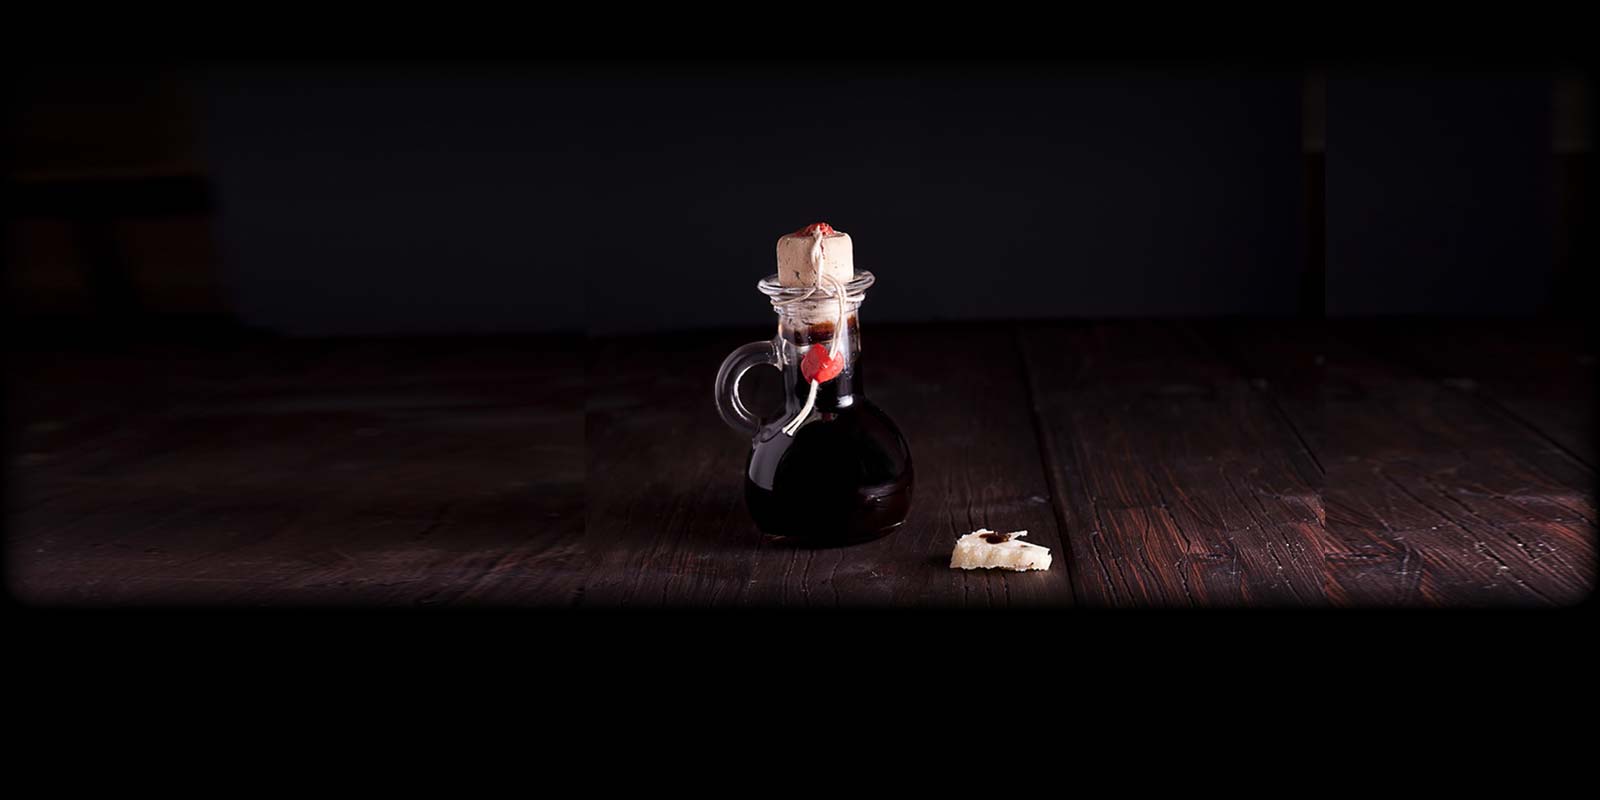 Aceto Balsamico Traditionale This vinegar is a purely natural product, free of preservatives and colorings. Only around 10,000 liters are produced each year, making it one of the rarest and most valuable vinegars in the world.